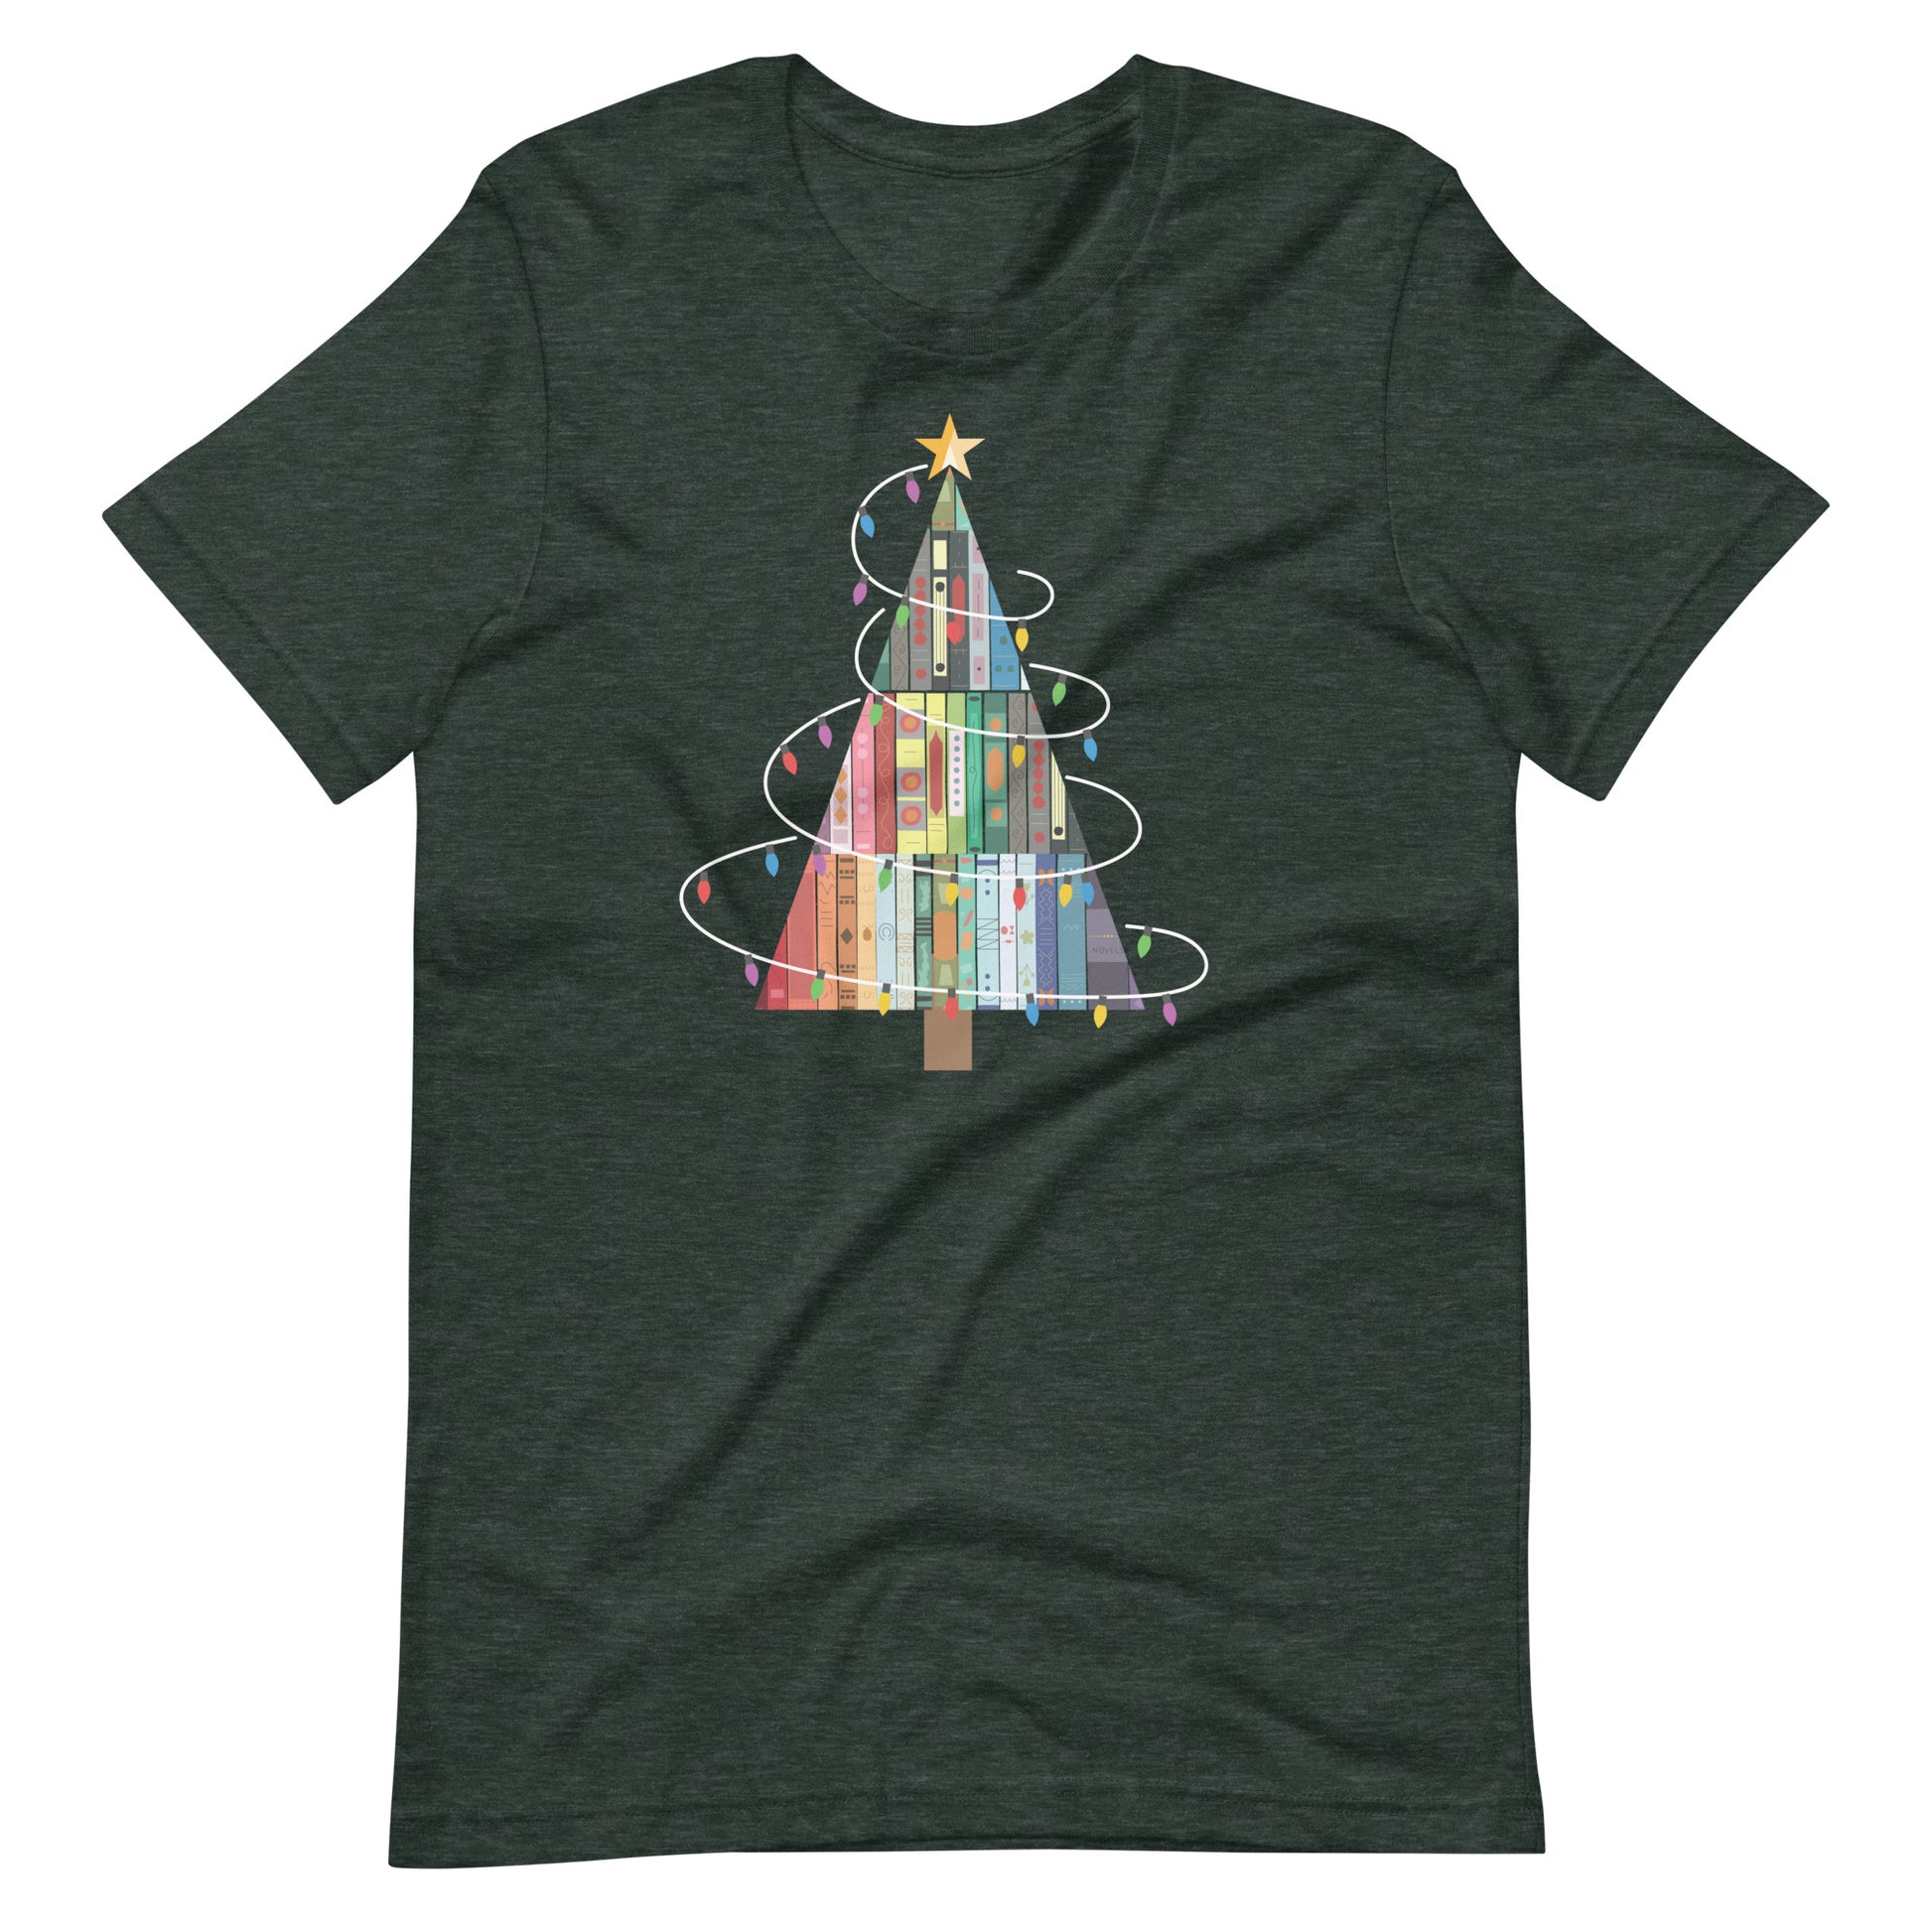 Librarian Christmas Holiday T-Shirt - Festive Book Tree Design